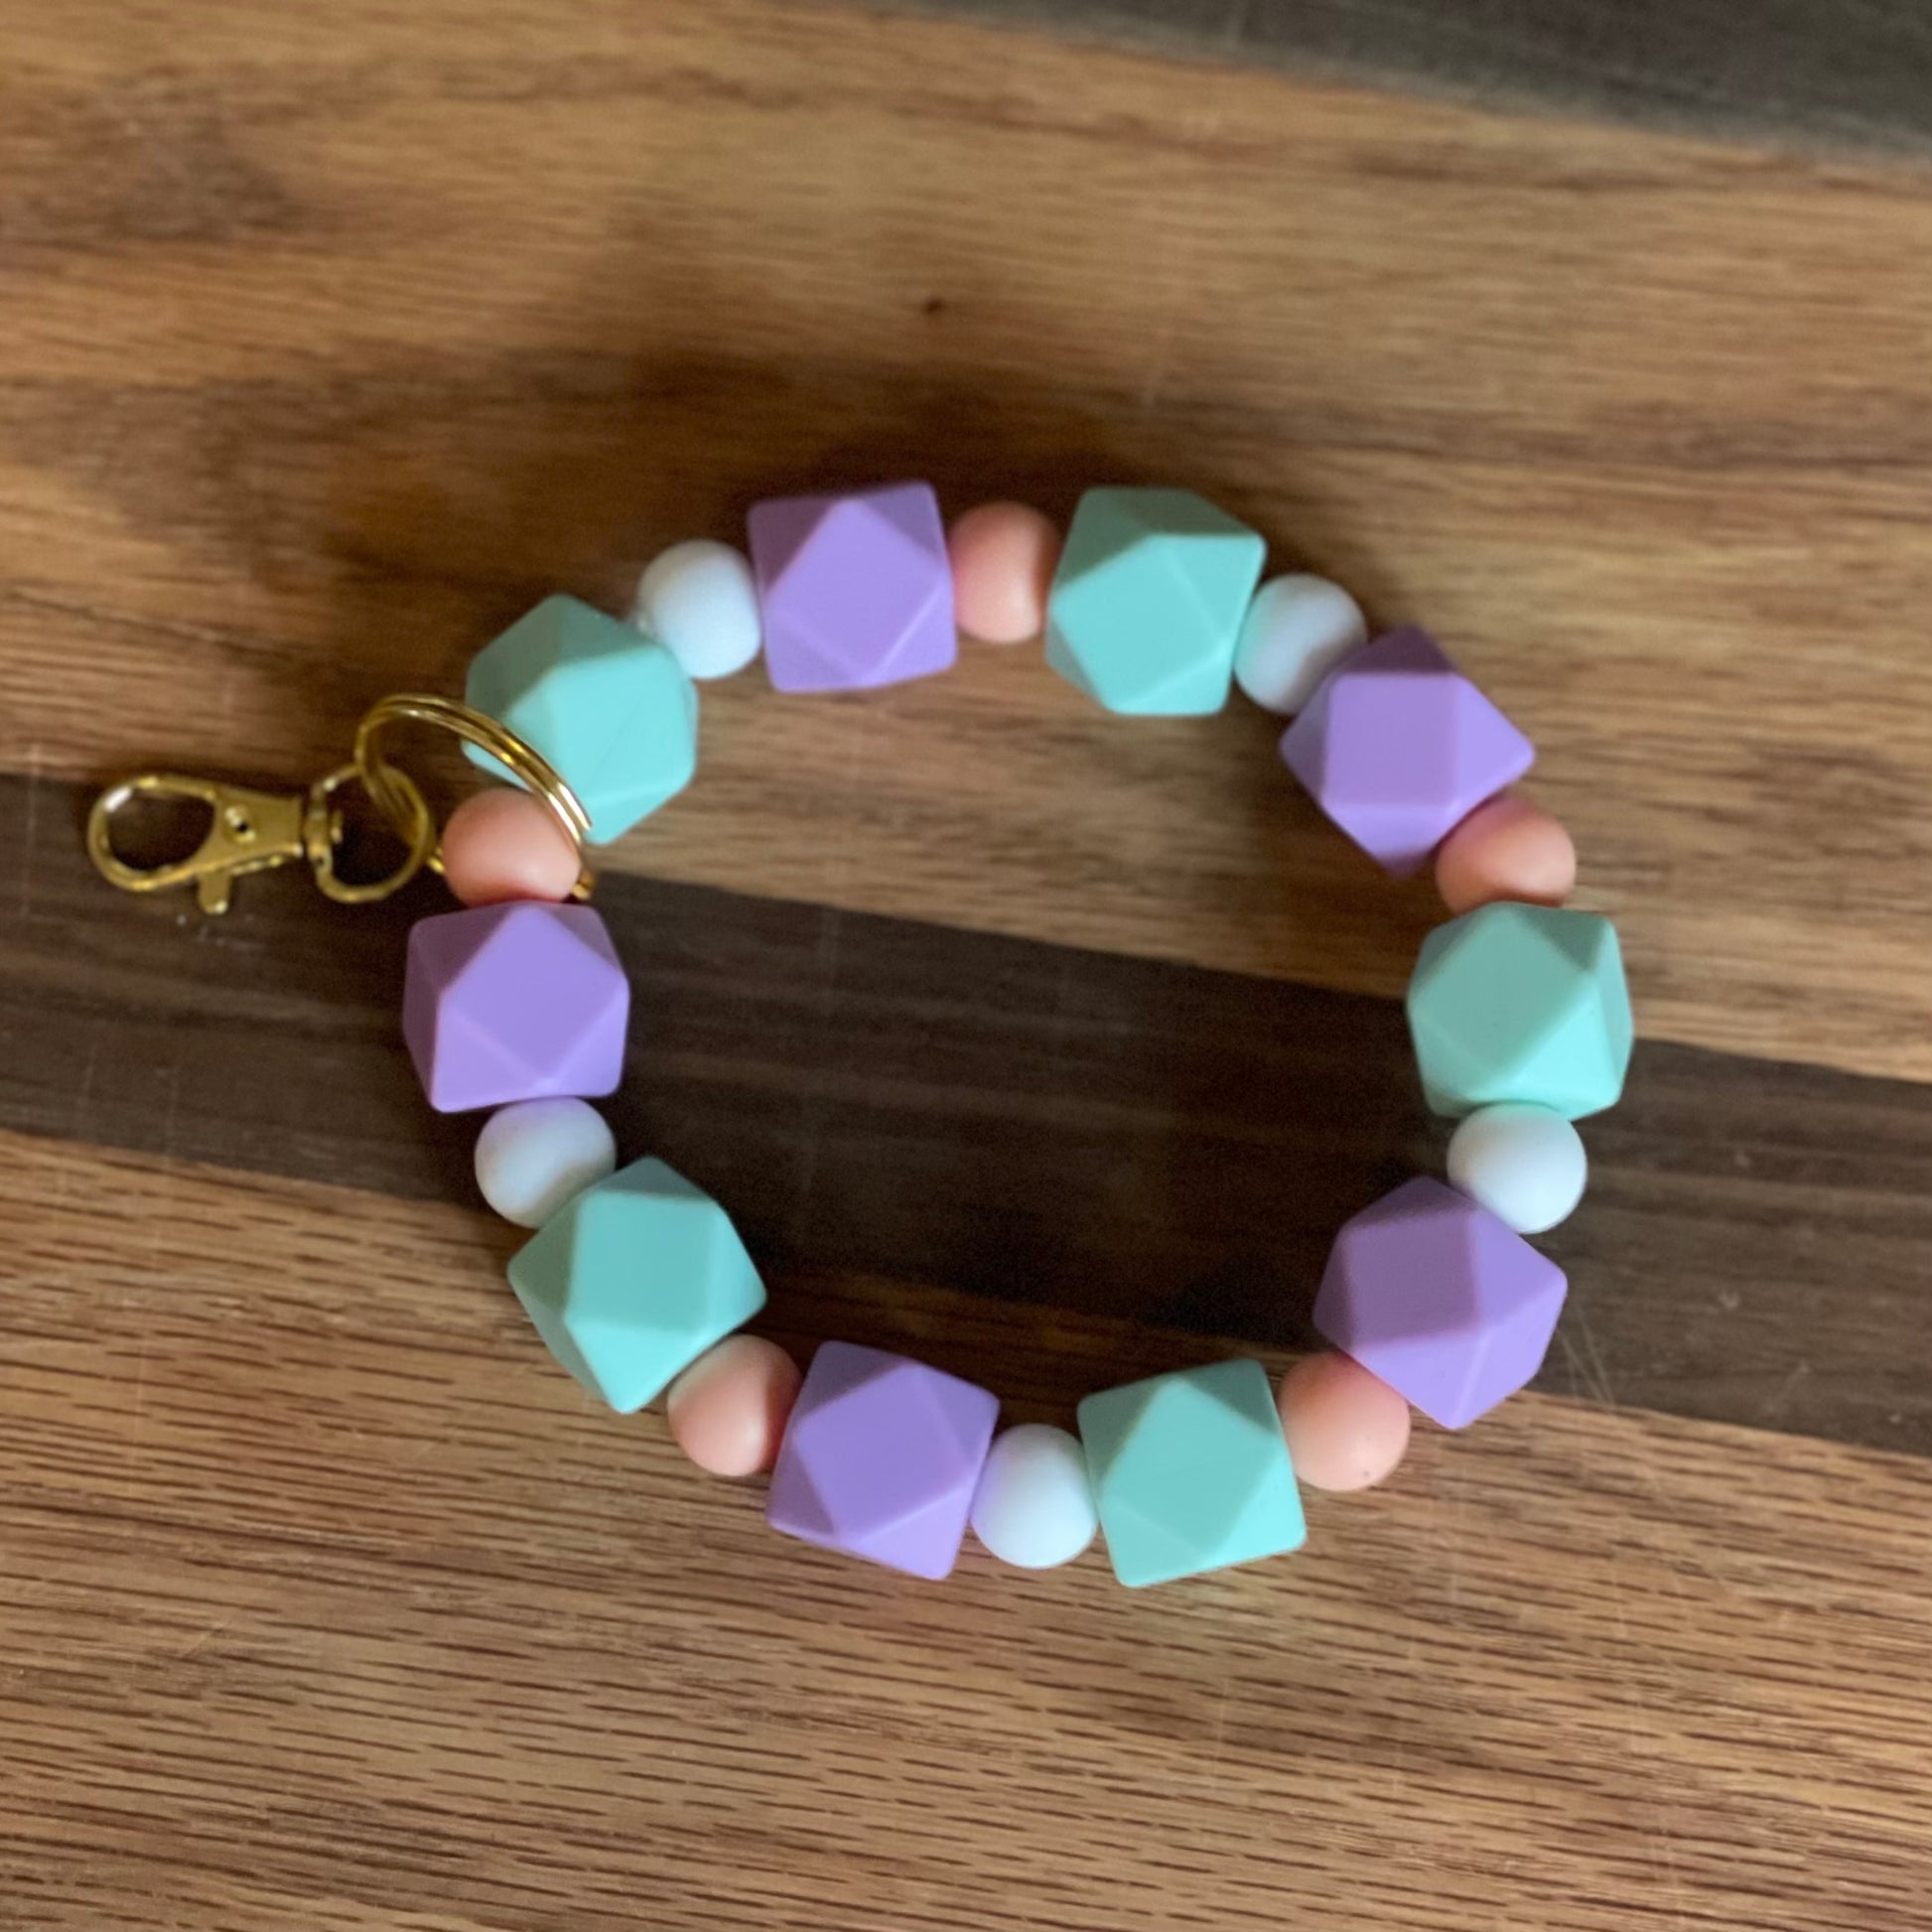 Light purple, peach, turquoise, and white silicone beaded wristlet keychain laying on flat surface